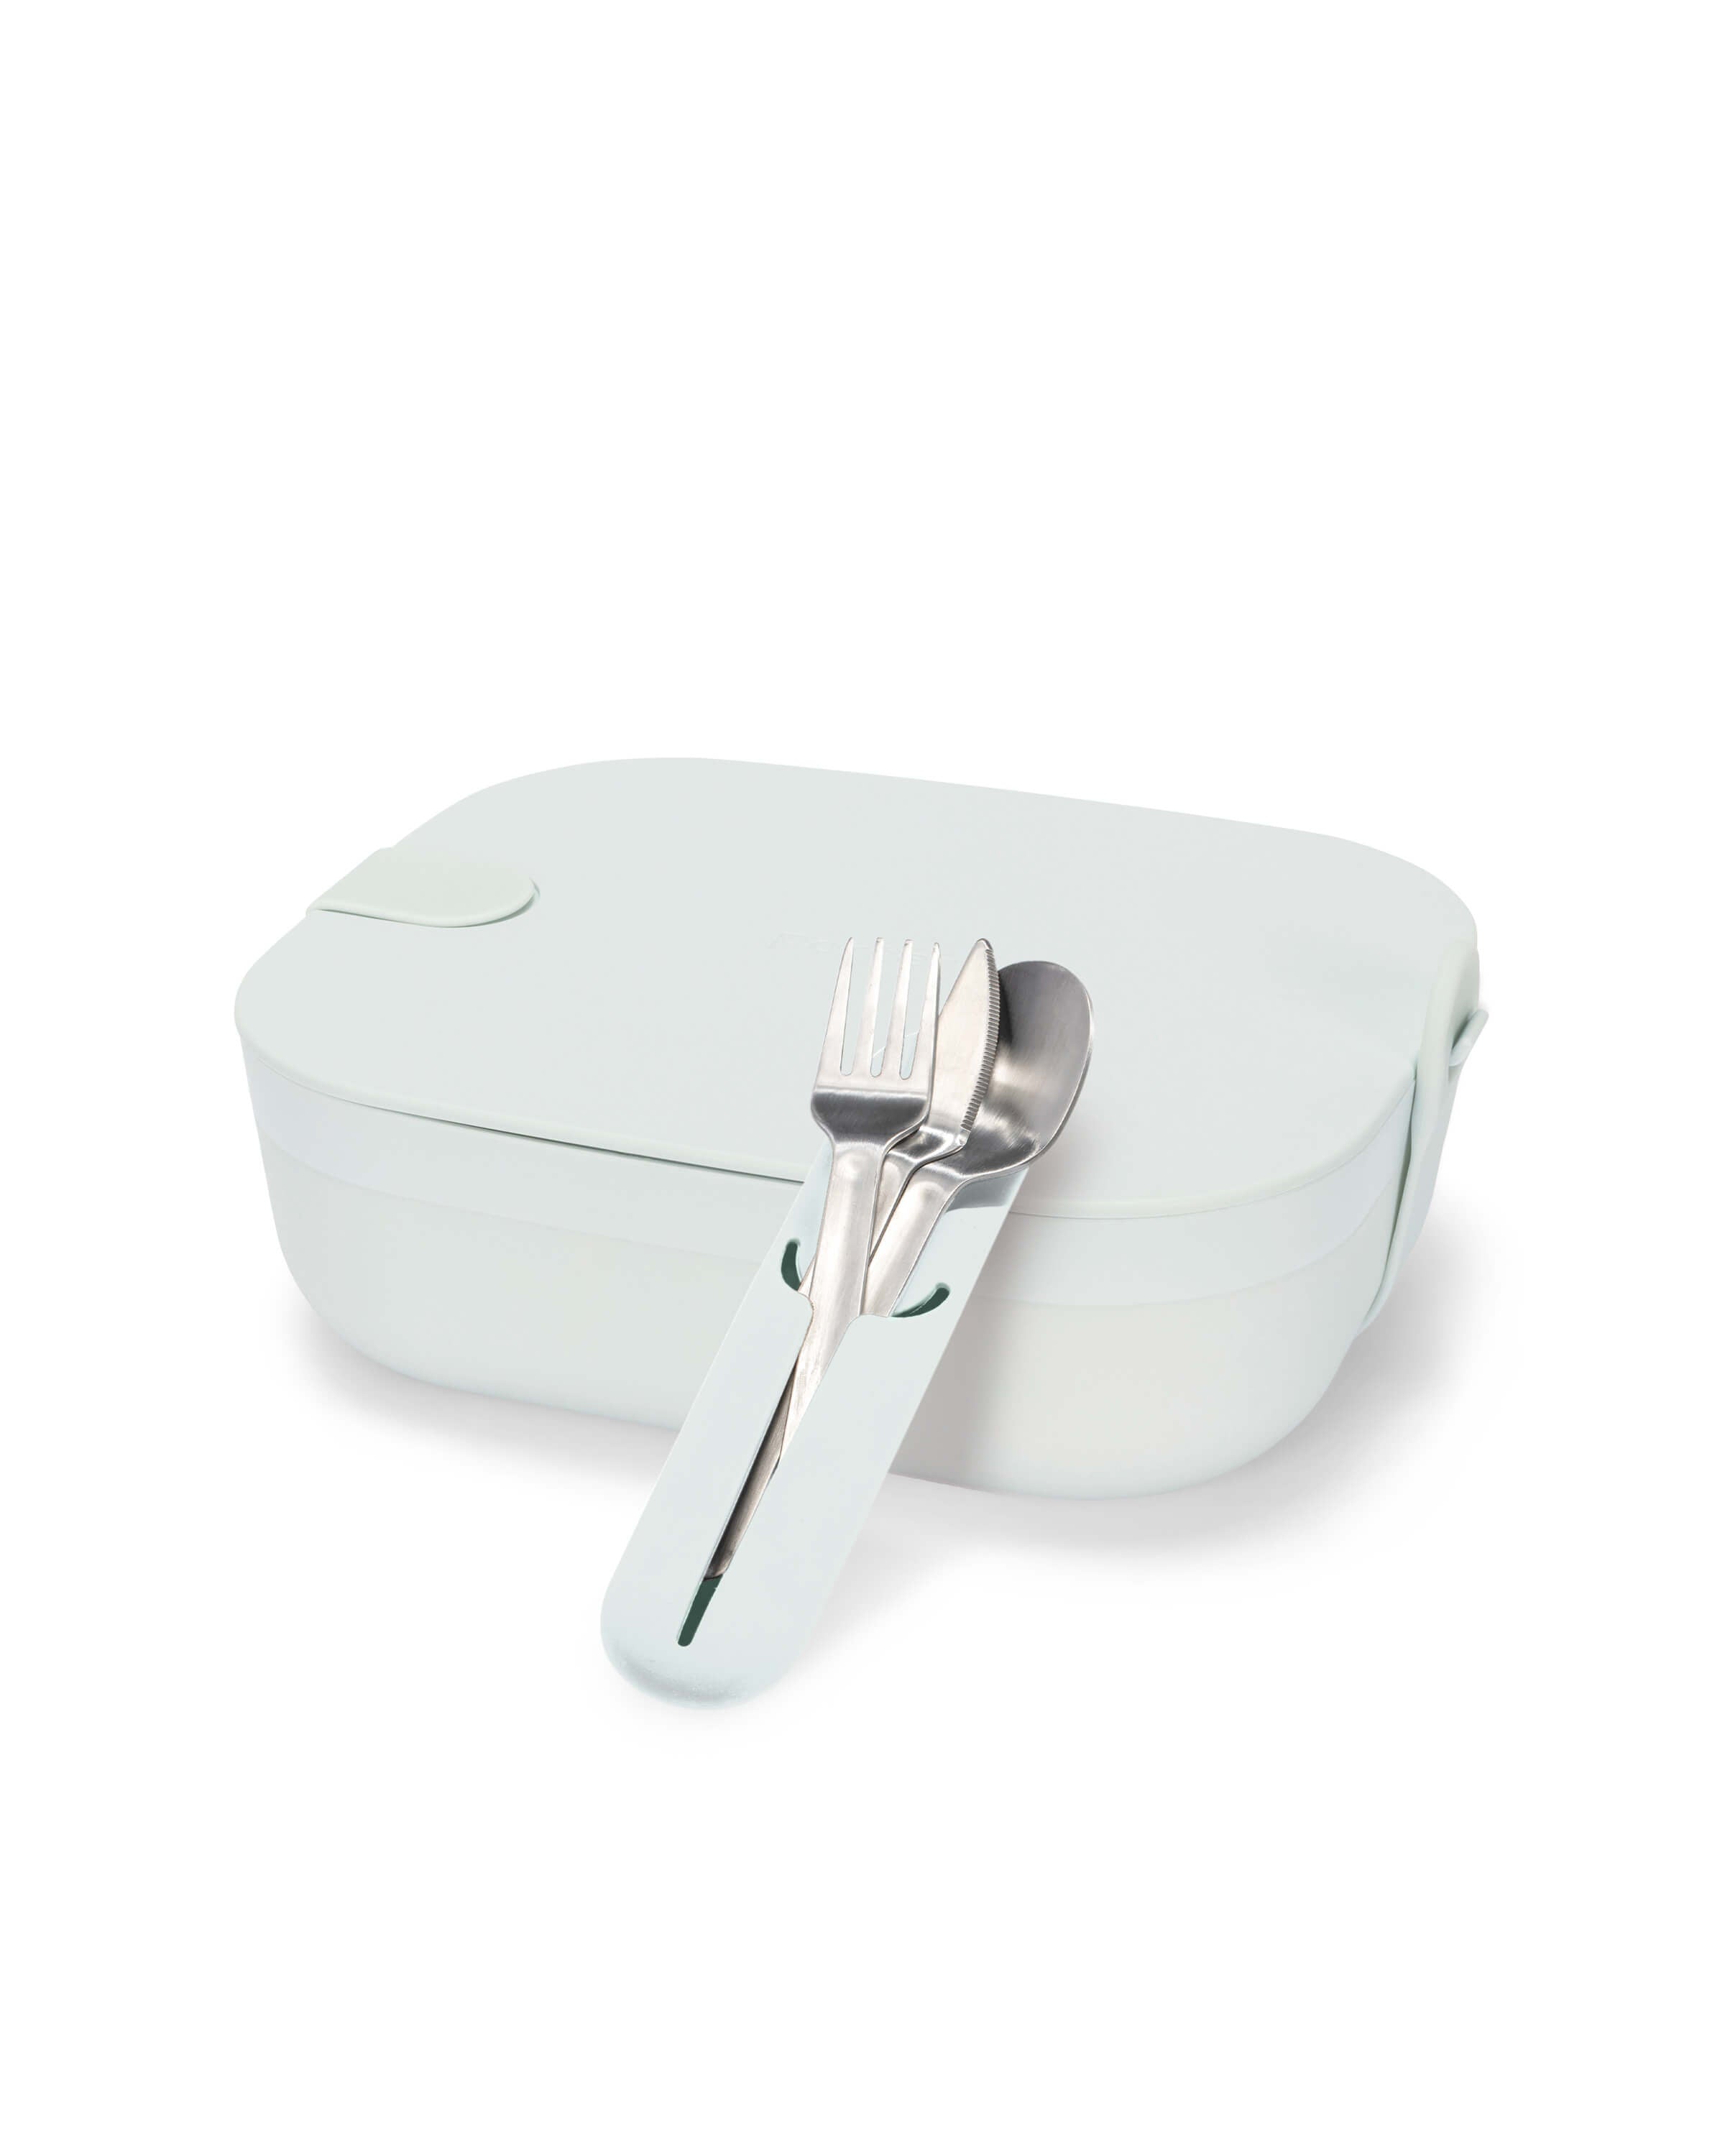 Stainless Steel Divided Lunch Box with Cutlery 37 oz